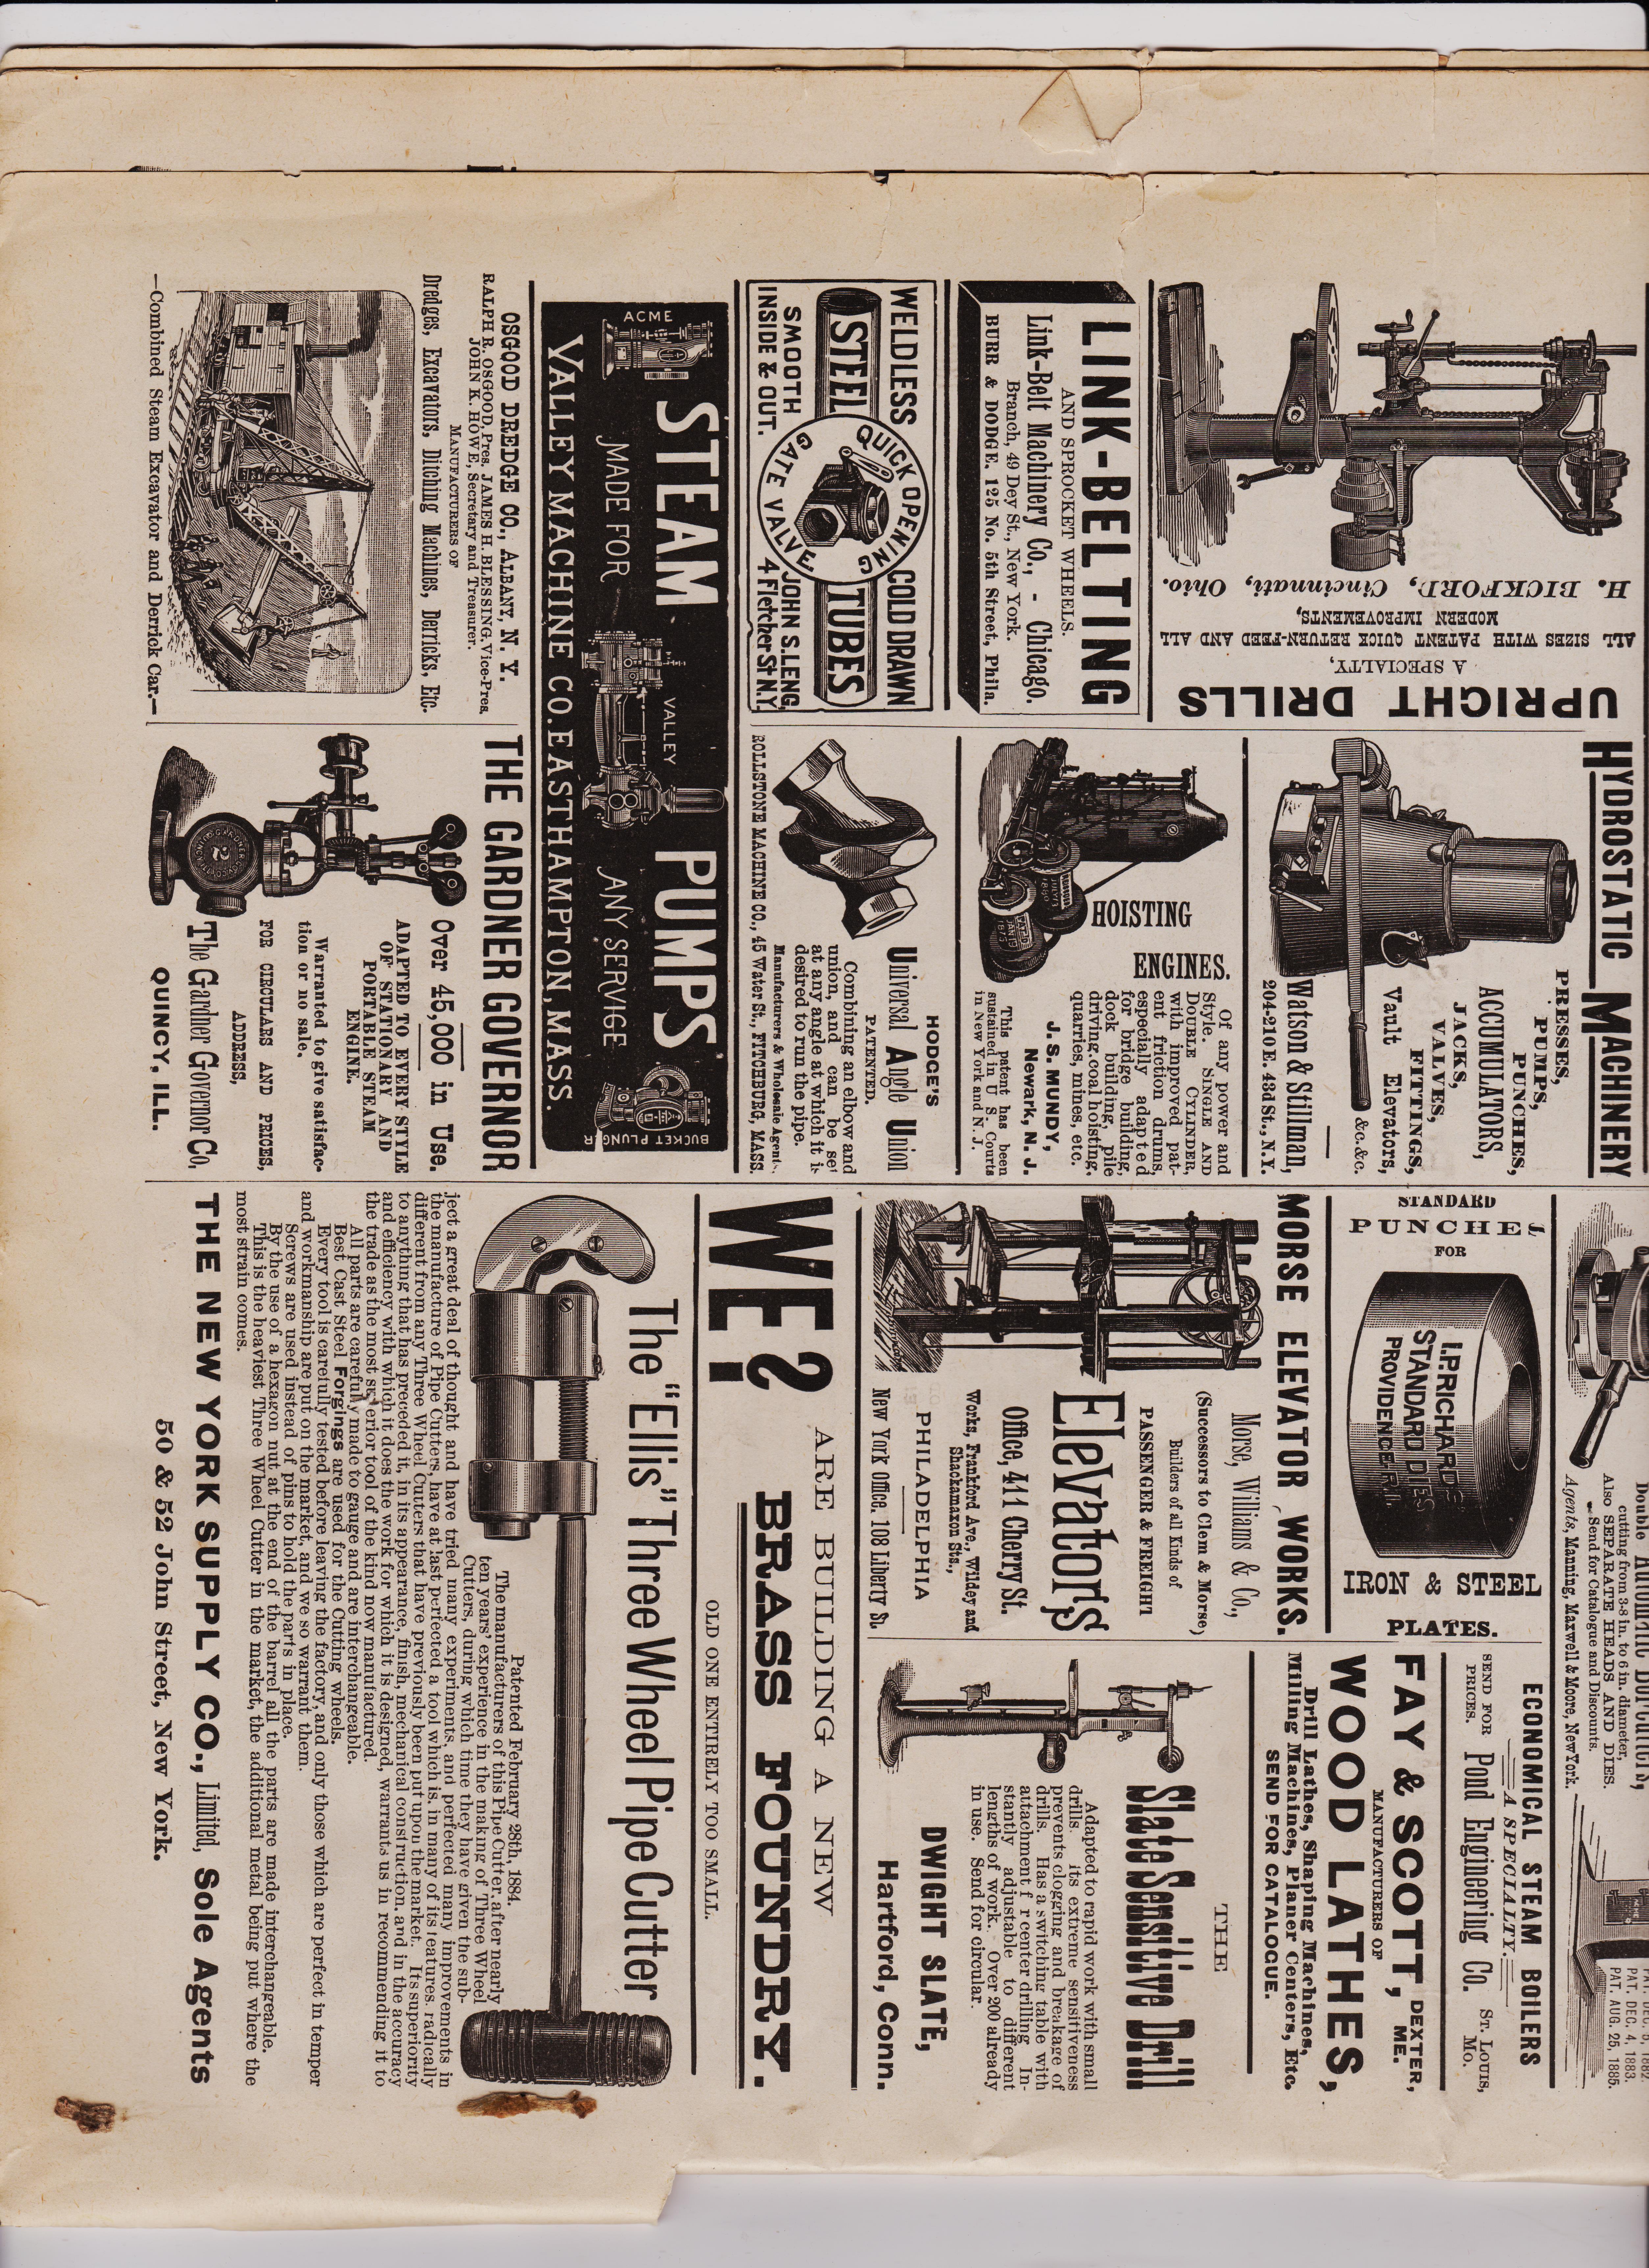 https://antiquemachinery.com/images-American-Machinist-Jan-22-1887/American-Machinist-Jan-15-1887-p-14-bot.jpeg